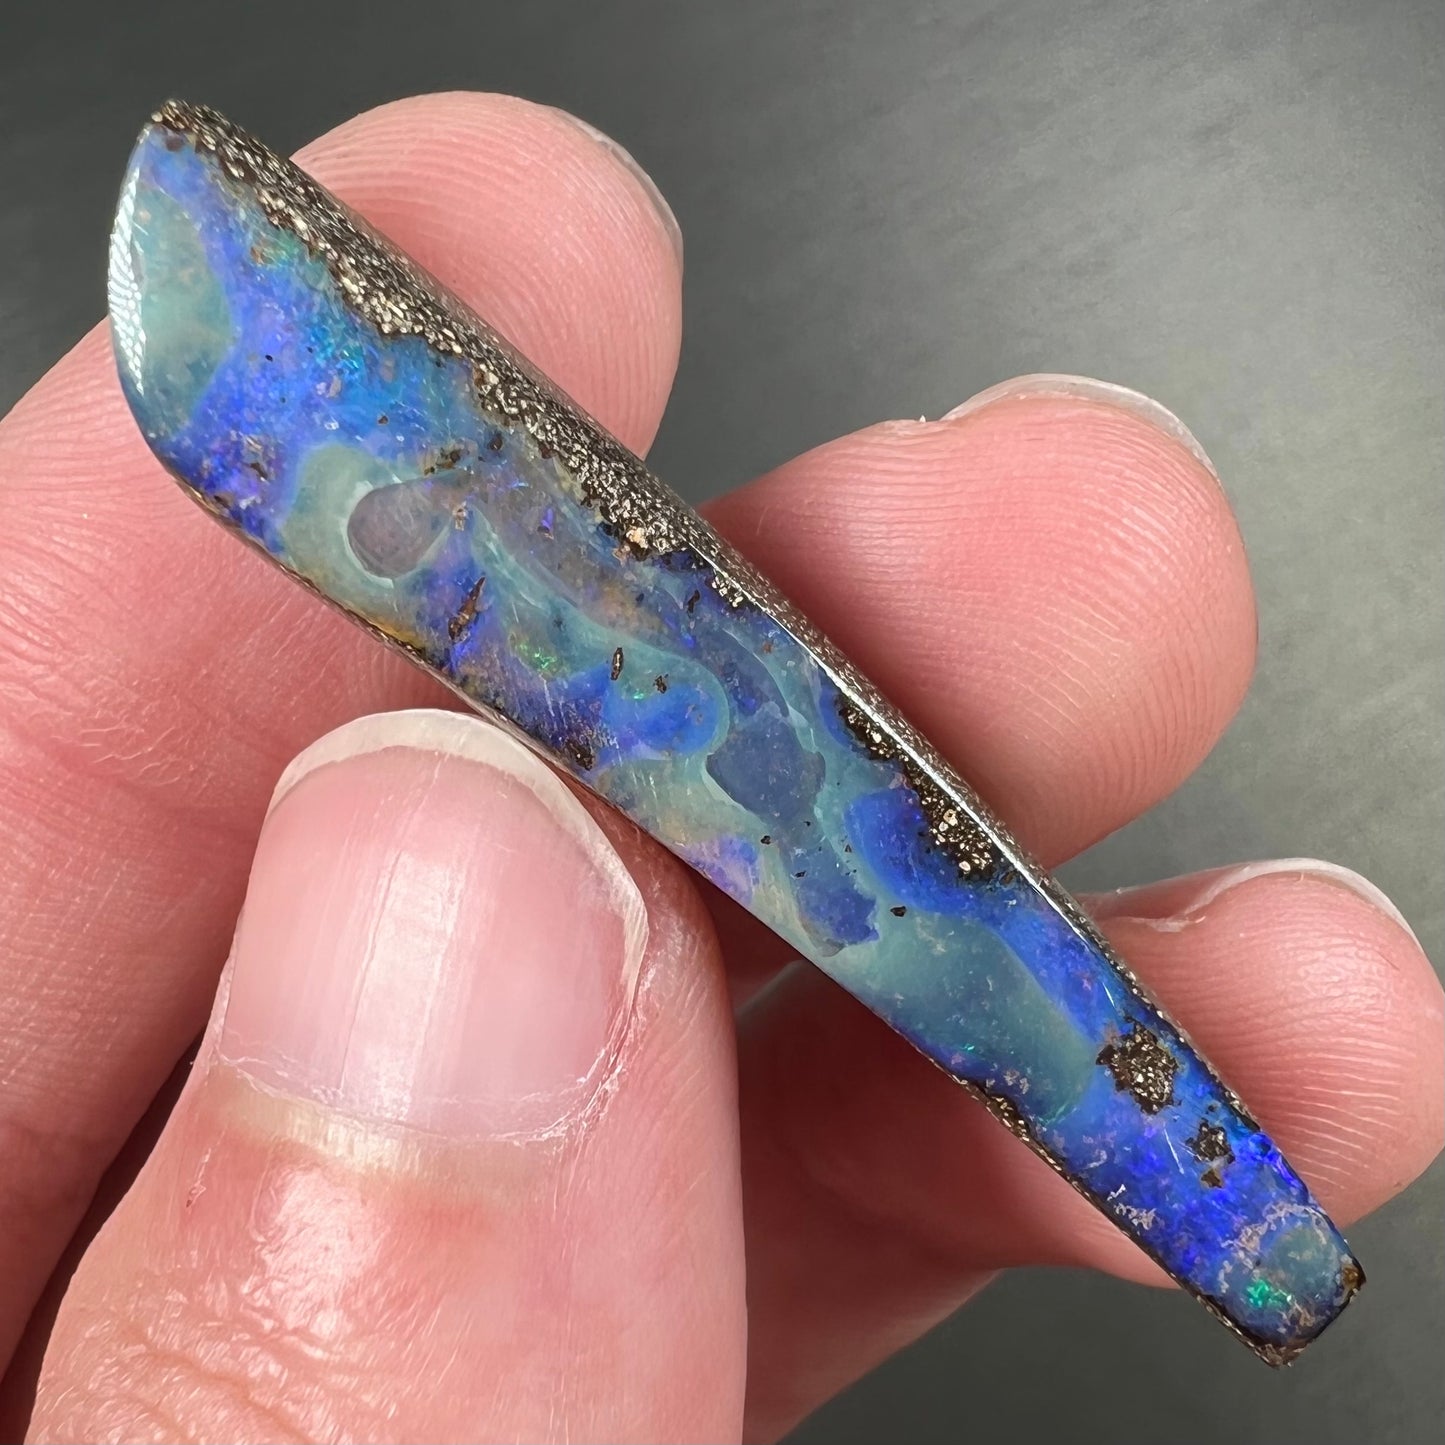 A loose, polished Quilpie boulder opal stone from Australia.  The stone is predominantly blue.